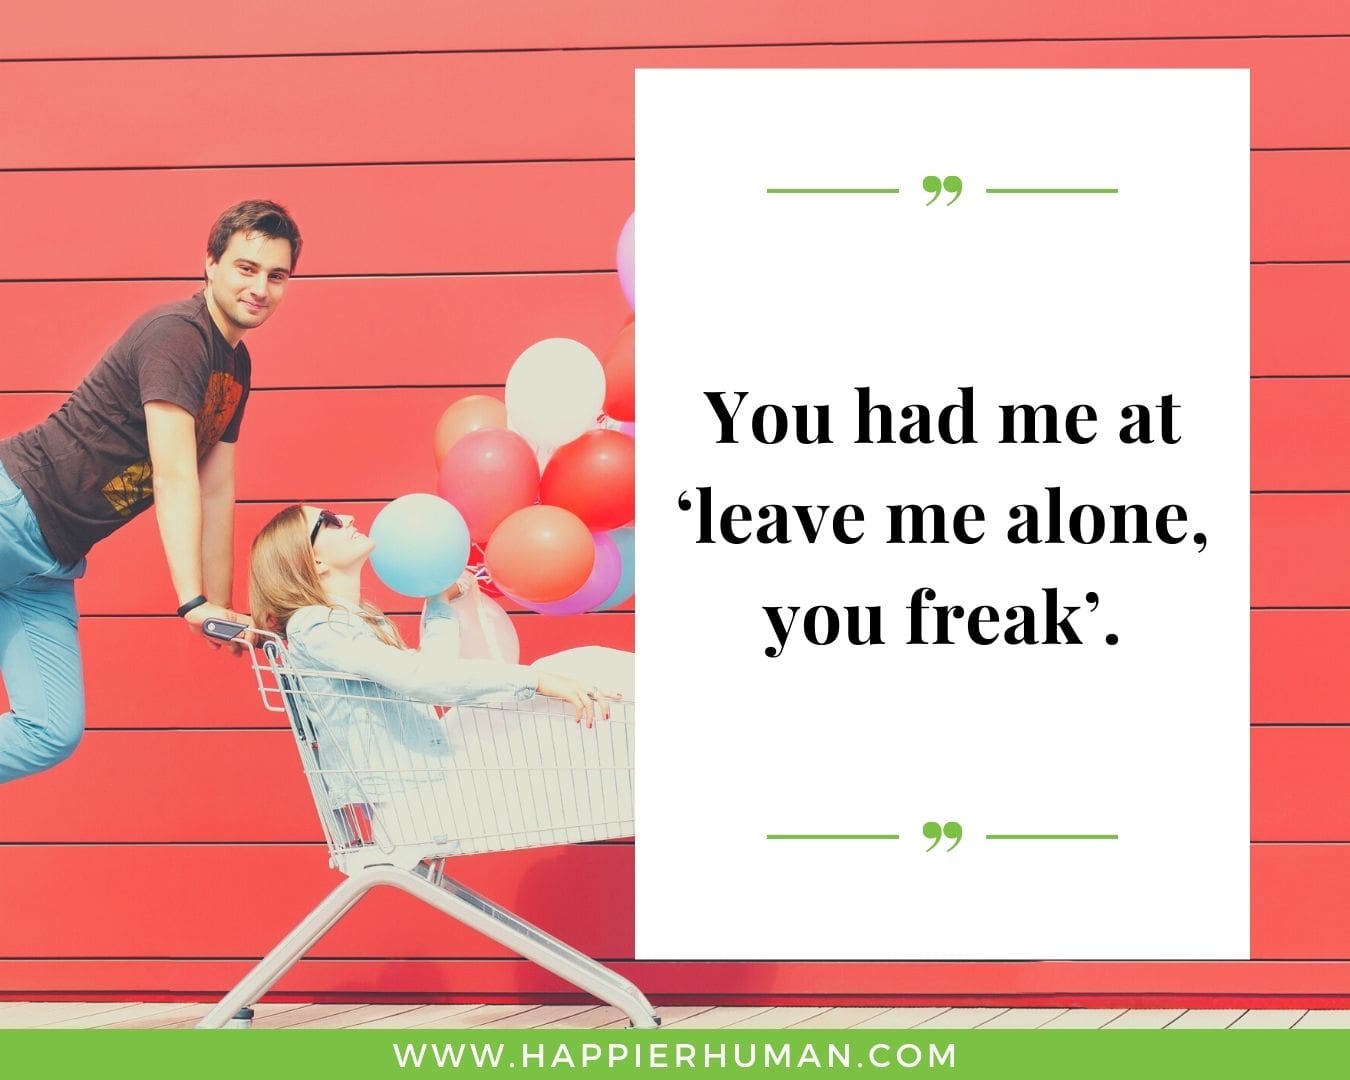 Show your love for her with these romantic quotes - “You had me at ‘leave me alone, you freak’.”